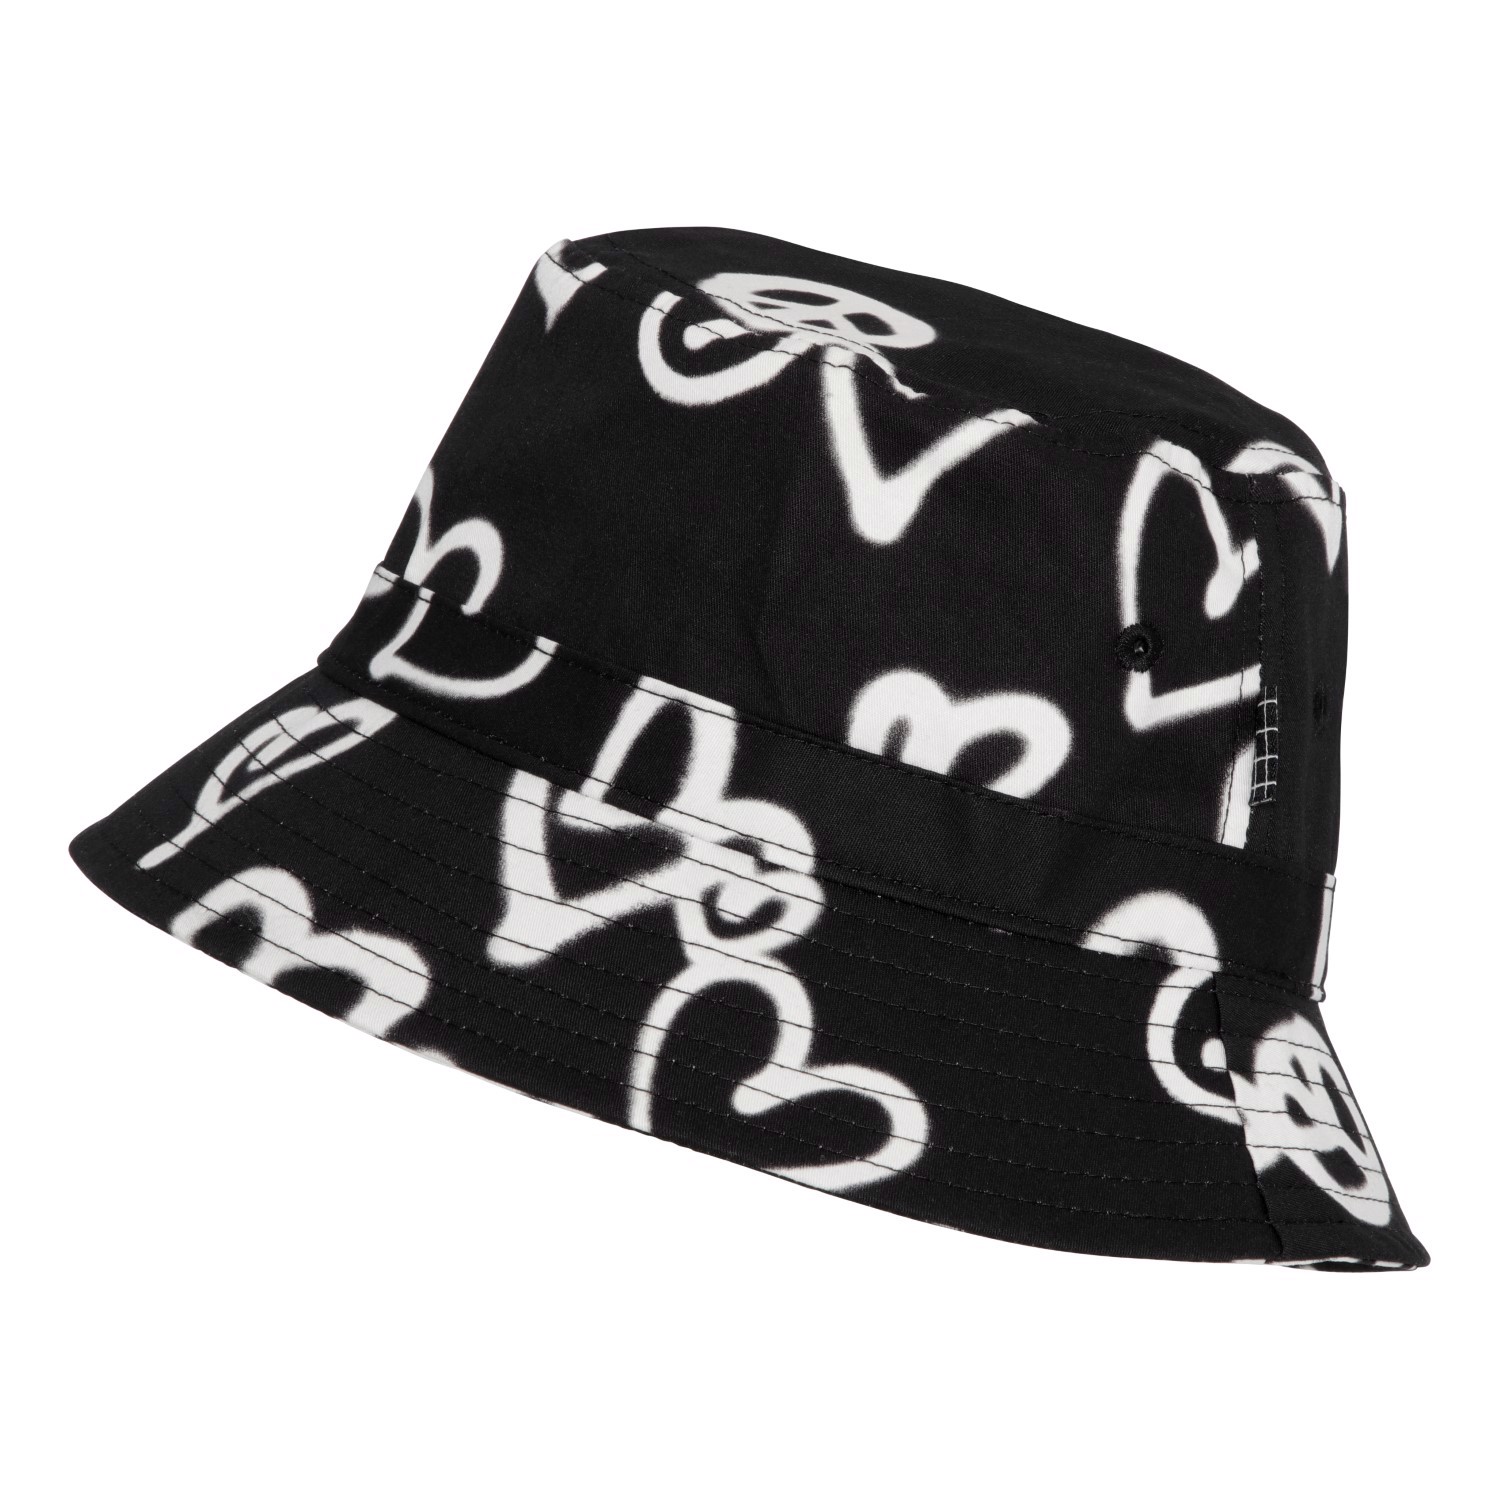 Siks - Sprayed Hearts - Black bucket hat with white heart and peace 